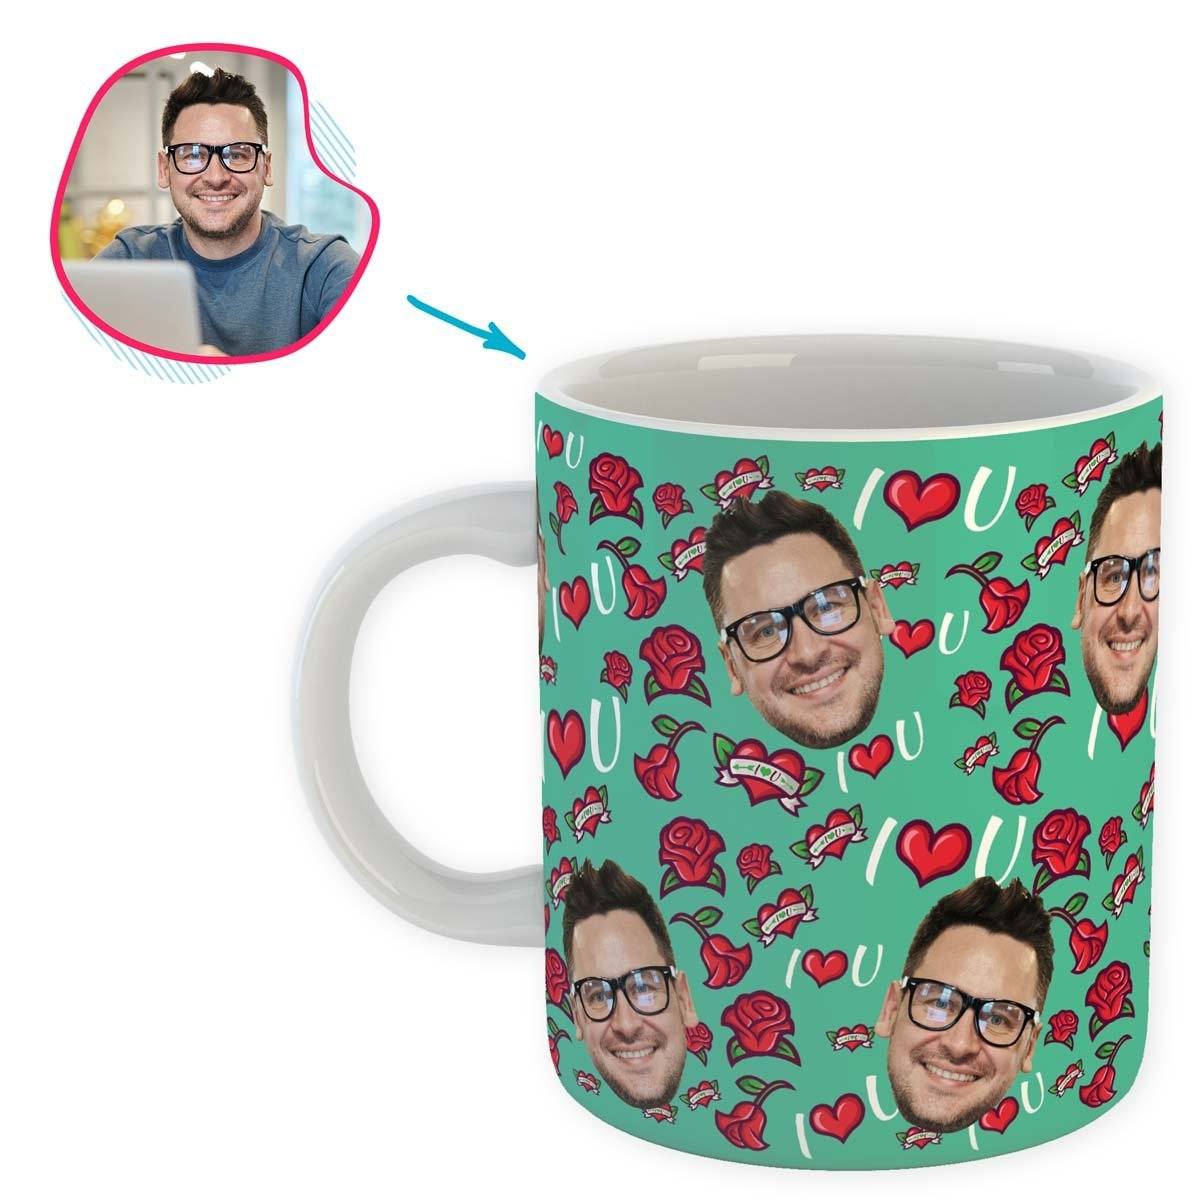 mint Valentines mug personalized with photo of face printed on it